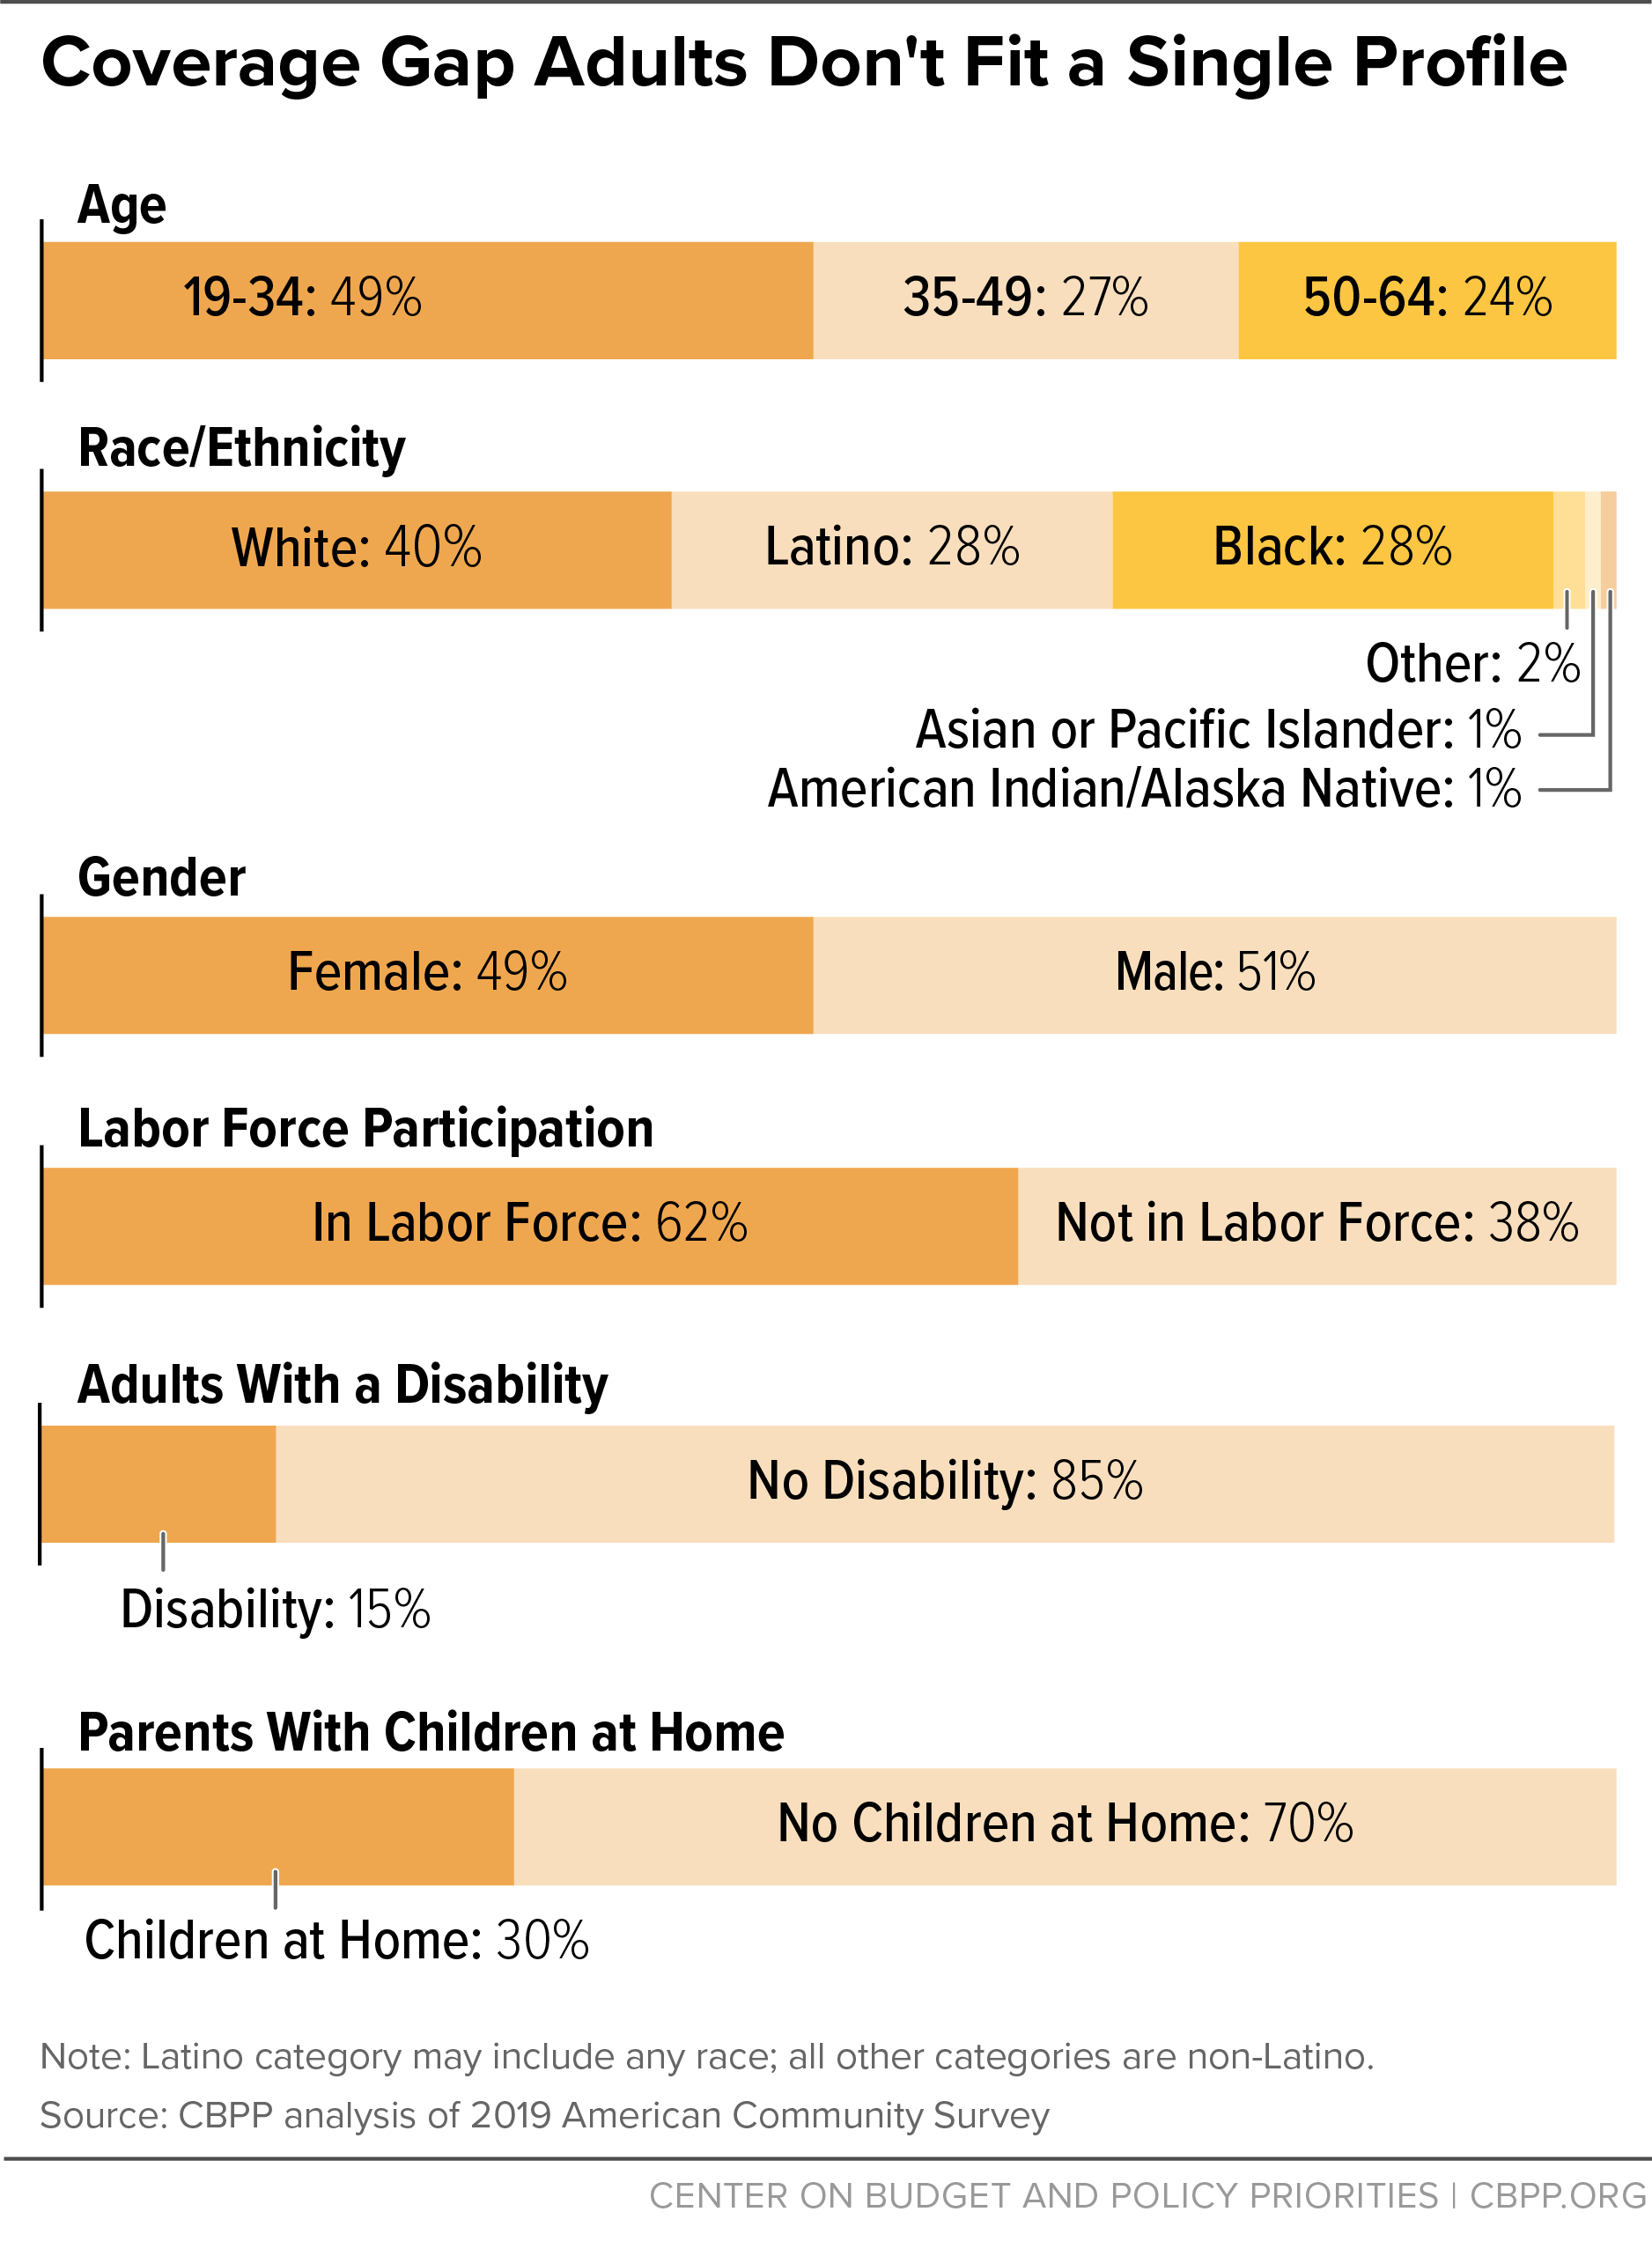 Coverage Gap Adults Don't Fit a Single Profile